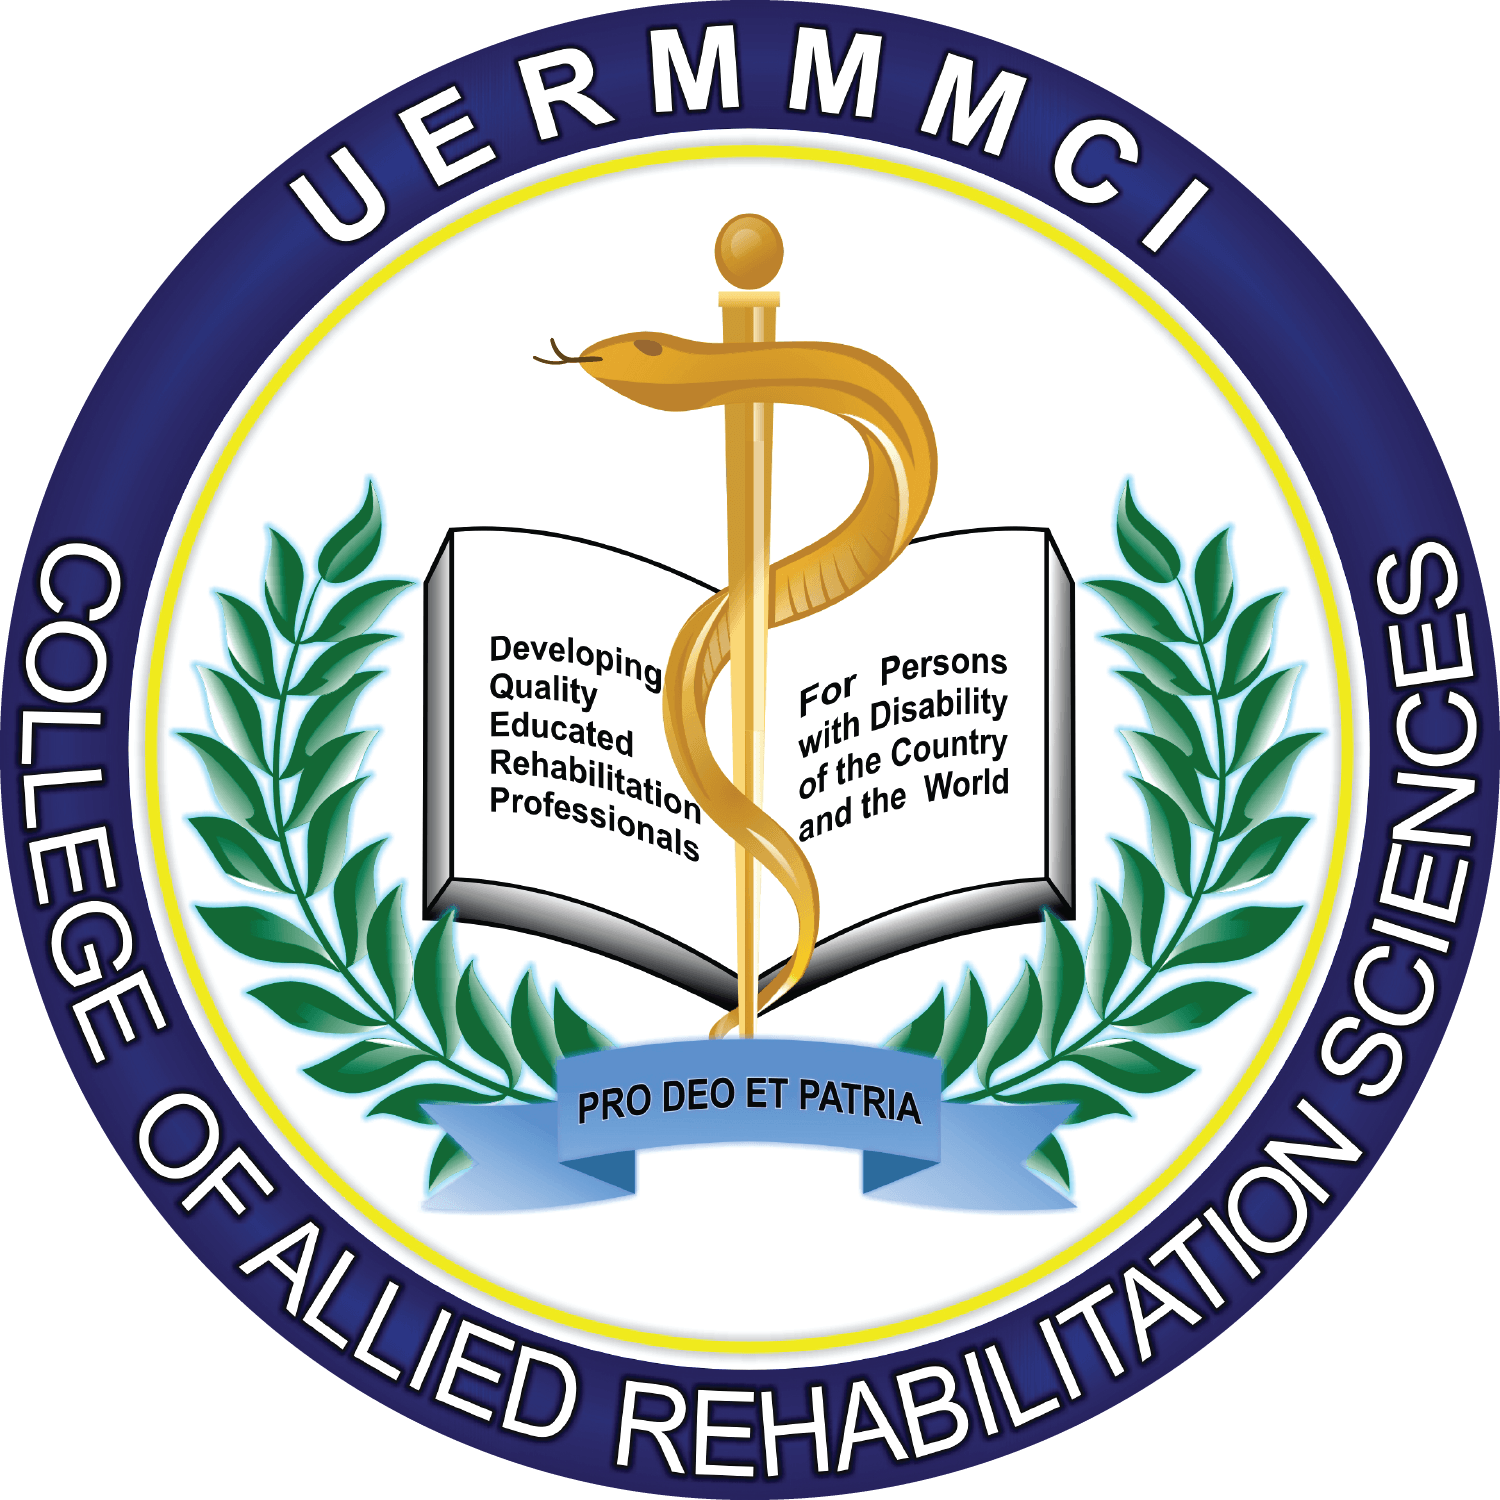 Gold White and Blue College Logo - UERMMMC - Aboutus